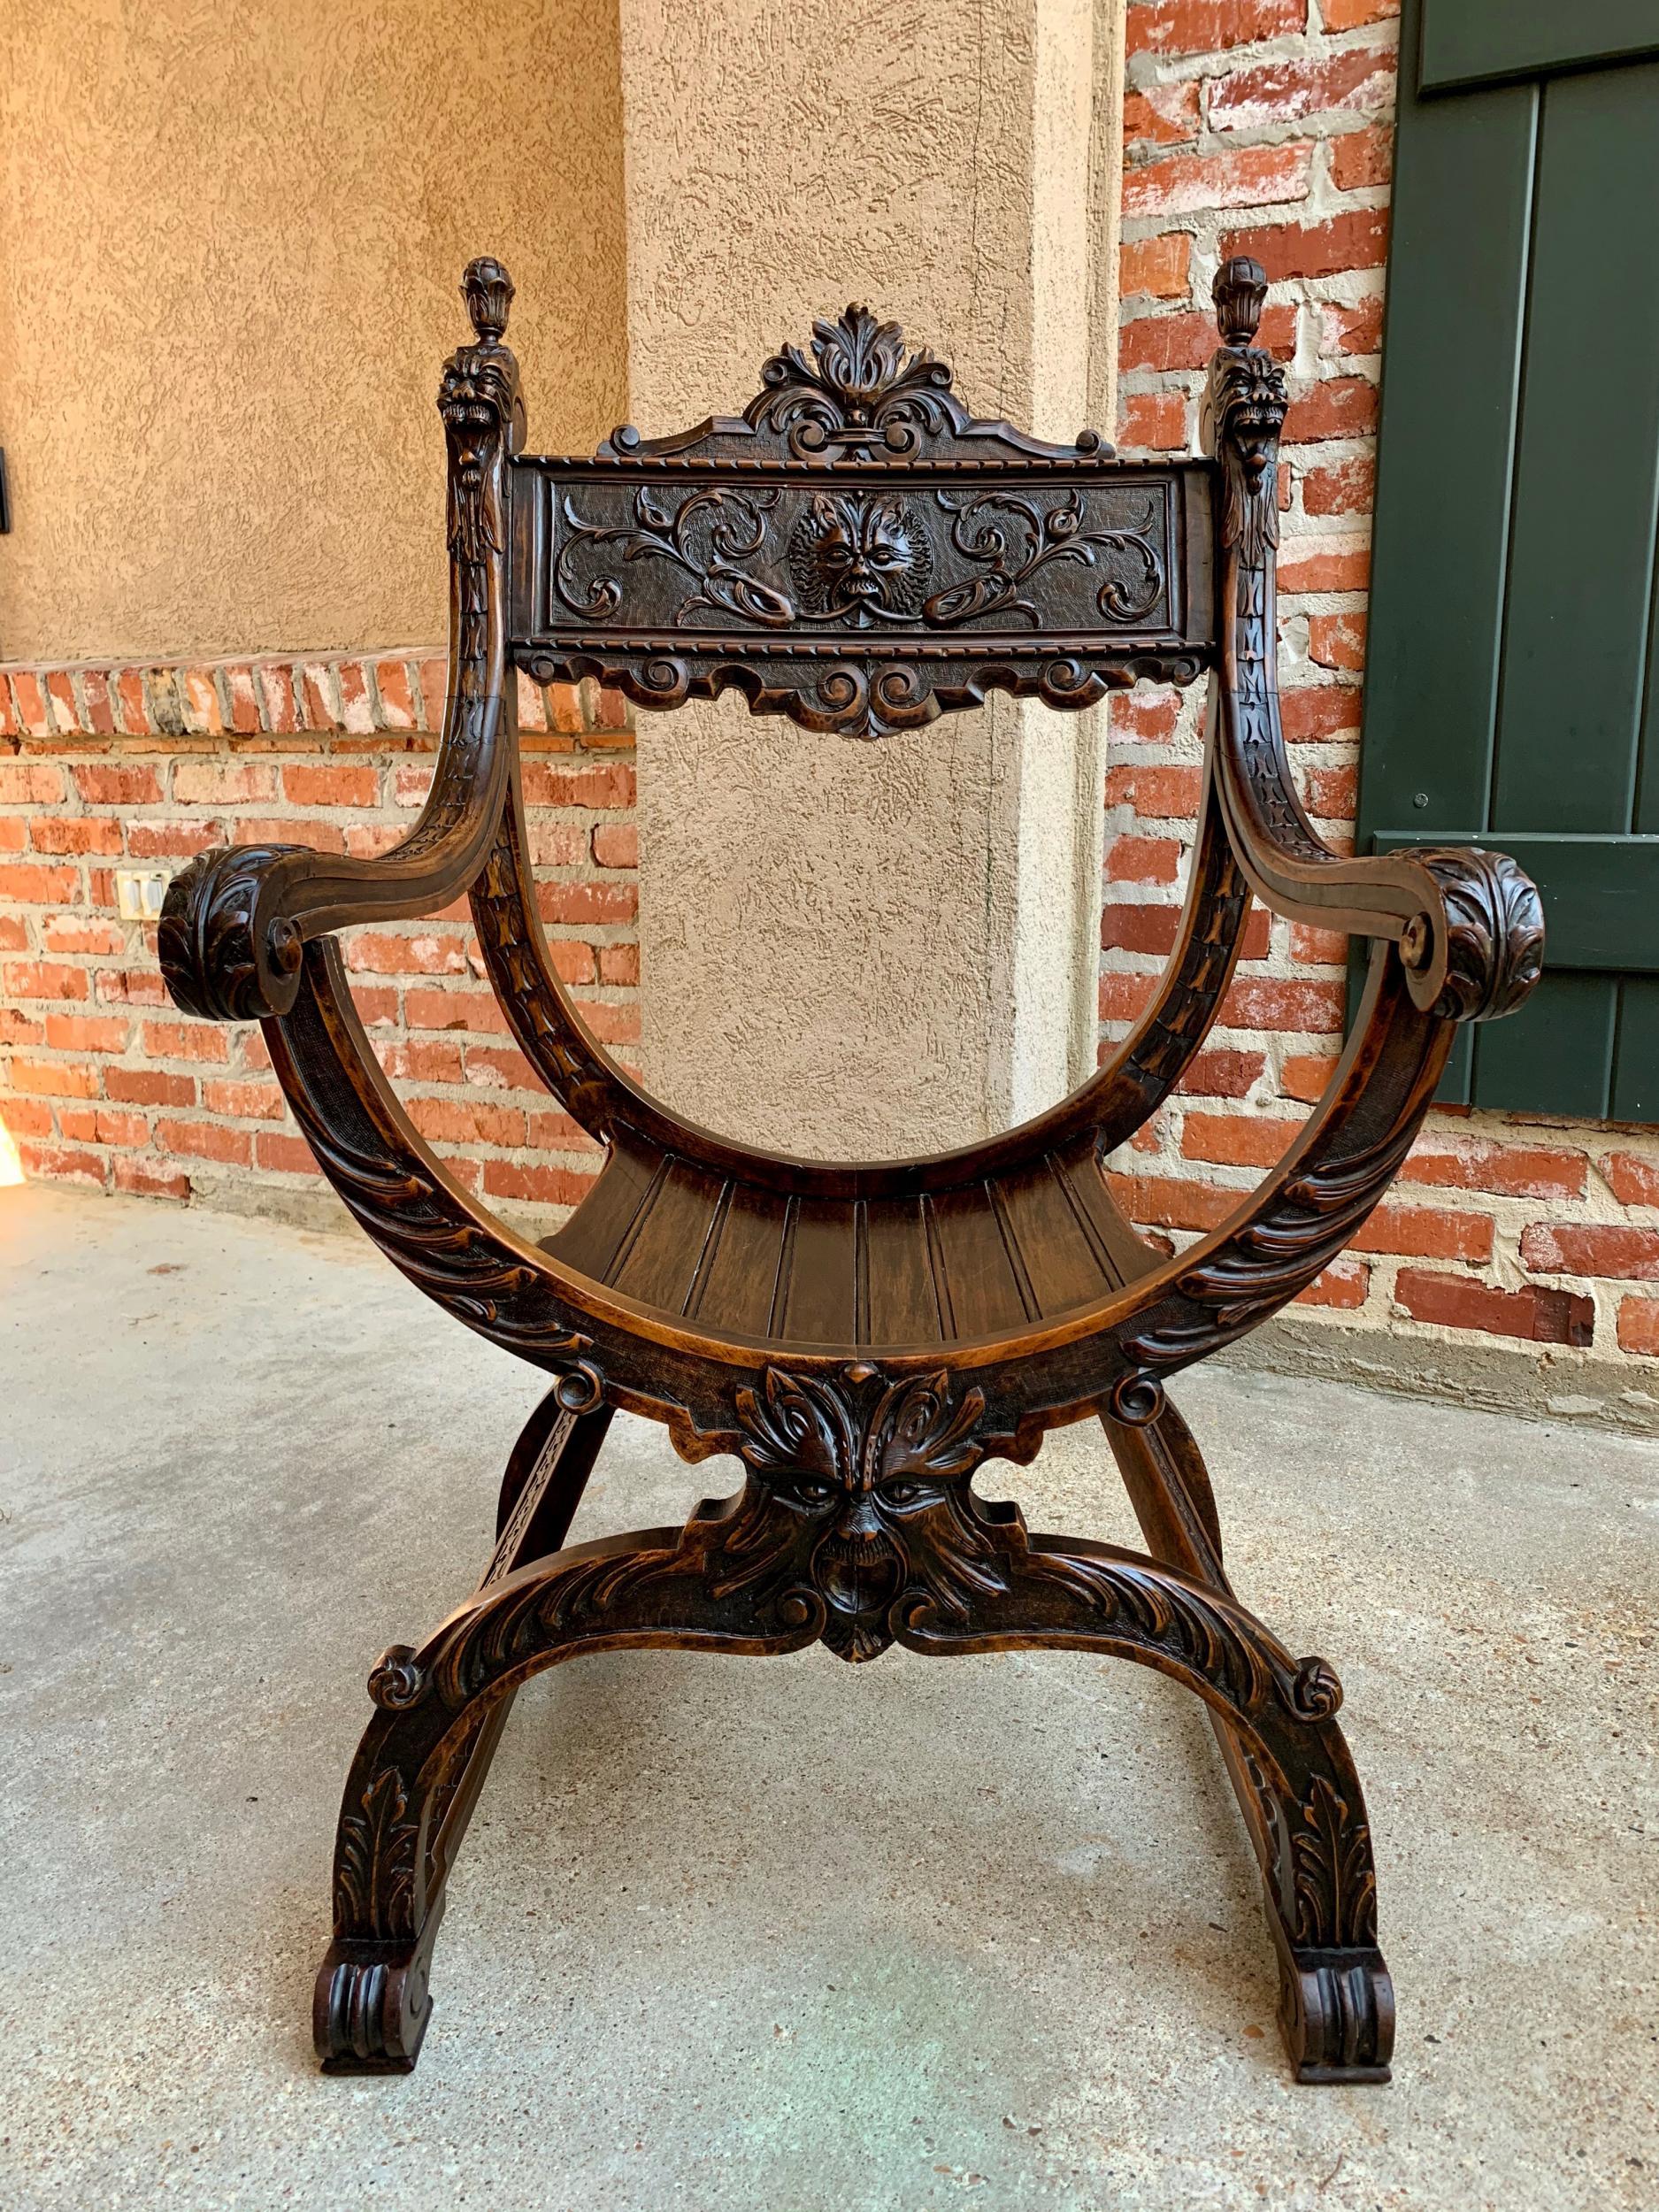 19th century French carved oak curule chair arm throne Renaissance Dagobert

~Direct from France~
~Stunning antique carved oak curule chair with beautifully detailed hand carvings from top to bottom.~
~Large ornate back panel features a high carved